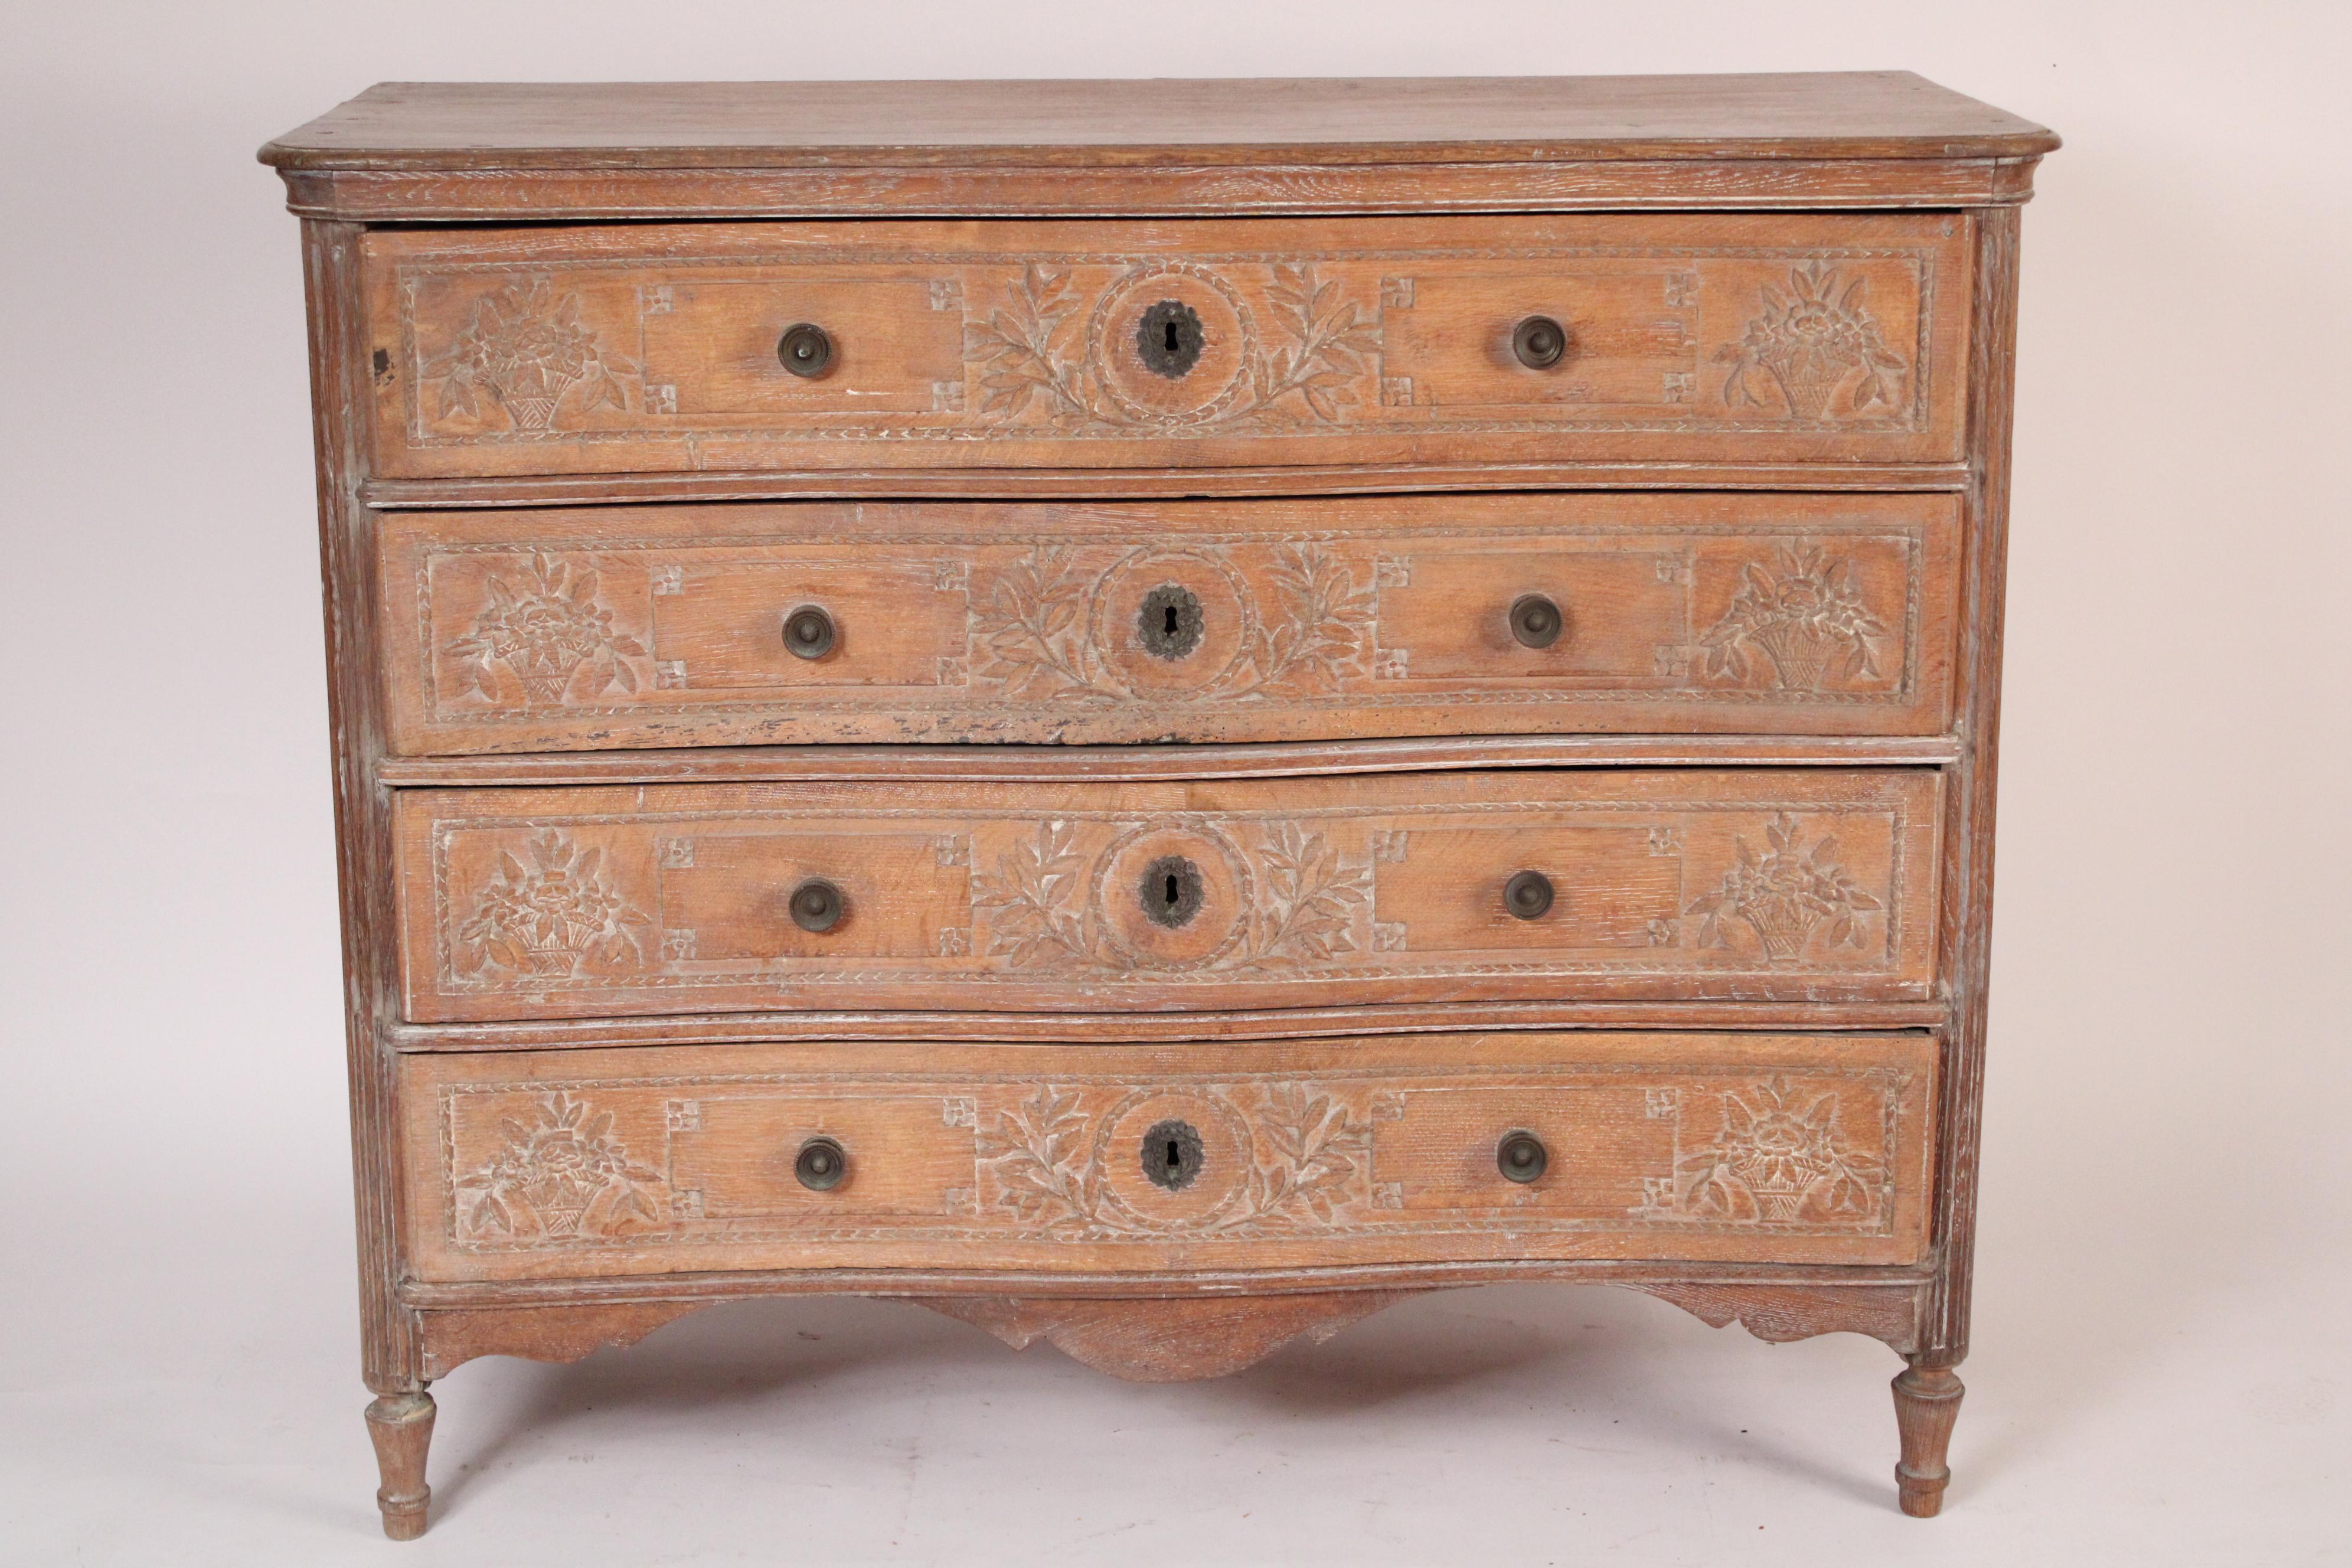 Antique Louis XVI style limed oak 4 drawer chest of drawers, 19th century. With a rectangular top with molded front and side edges and a serpentine shaped front edge, 4 serpentine shaped drawers with floral carving and brass escutcheons and brass